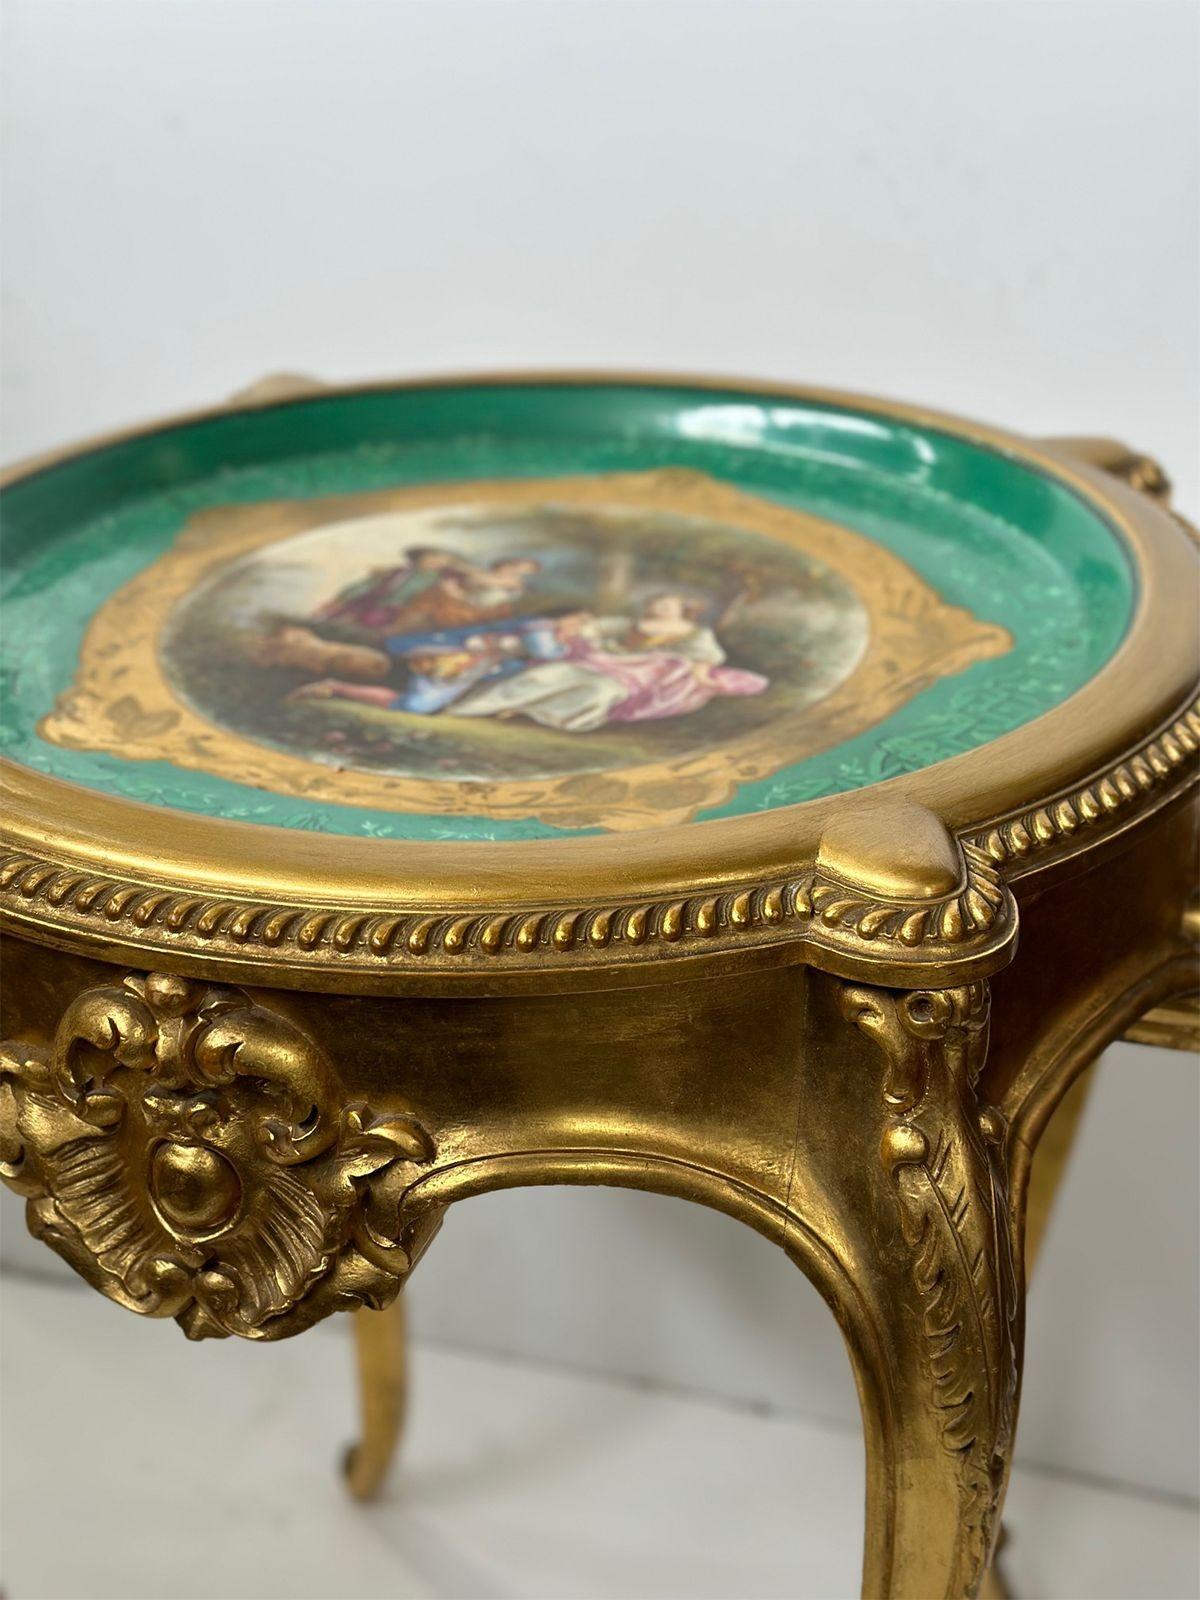 Hand-carved wood table with porcelain plaque and gold finish depicting a small group in a garden accompanied with a lamb. Made in France, circa 1900s. 

Dimensions:
31.25